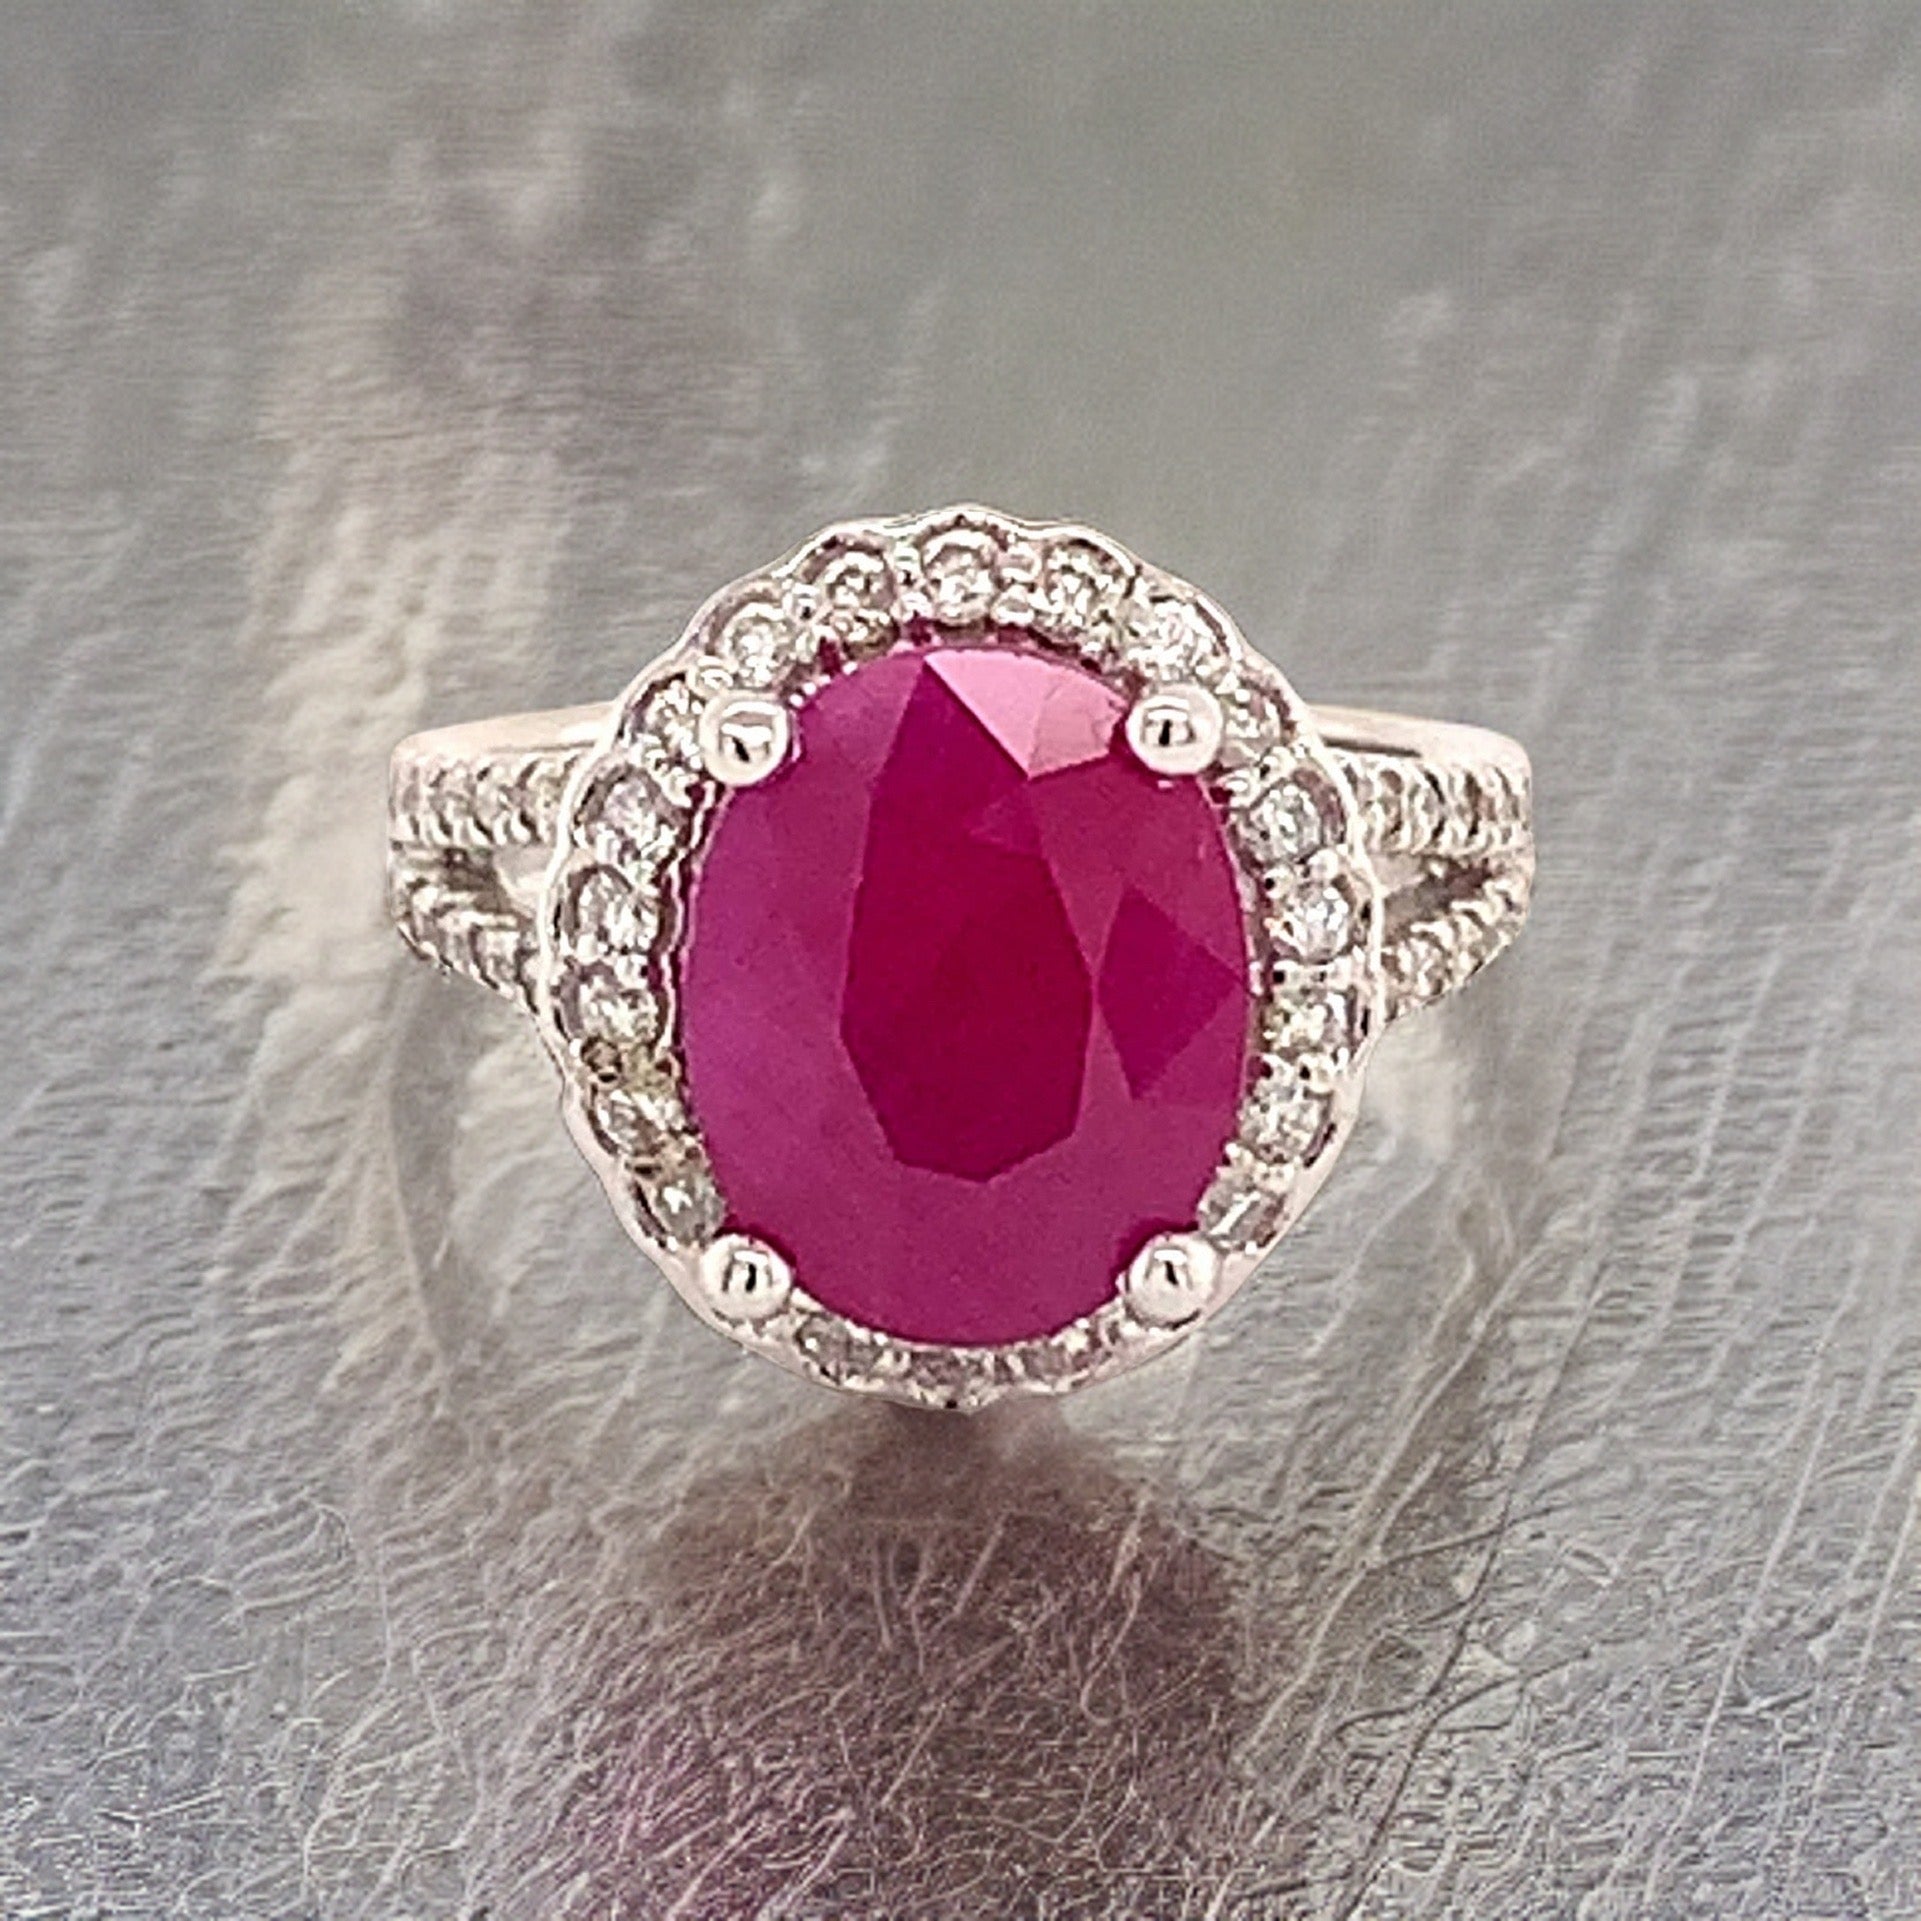 Natural Ruby Diamond Ring 14k Gold 6.5 TCW Size 5.75 GIA Certified $6,950 111871 - Certified Fine Jewelry